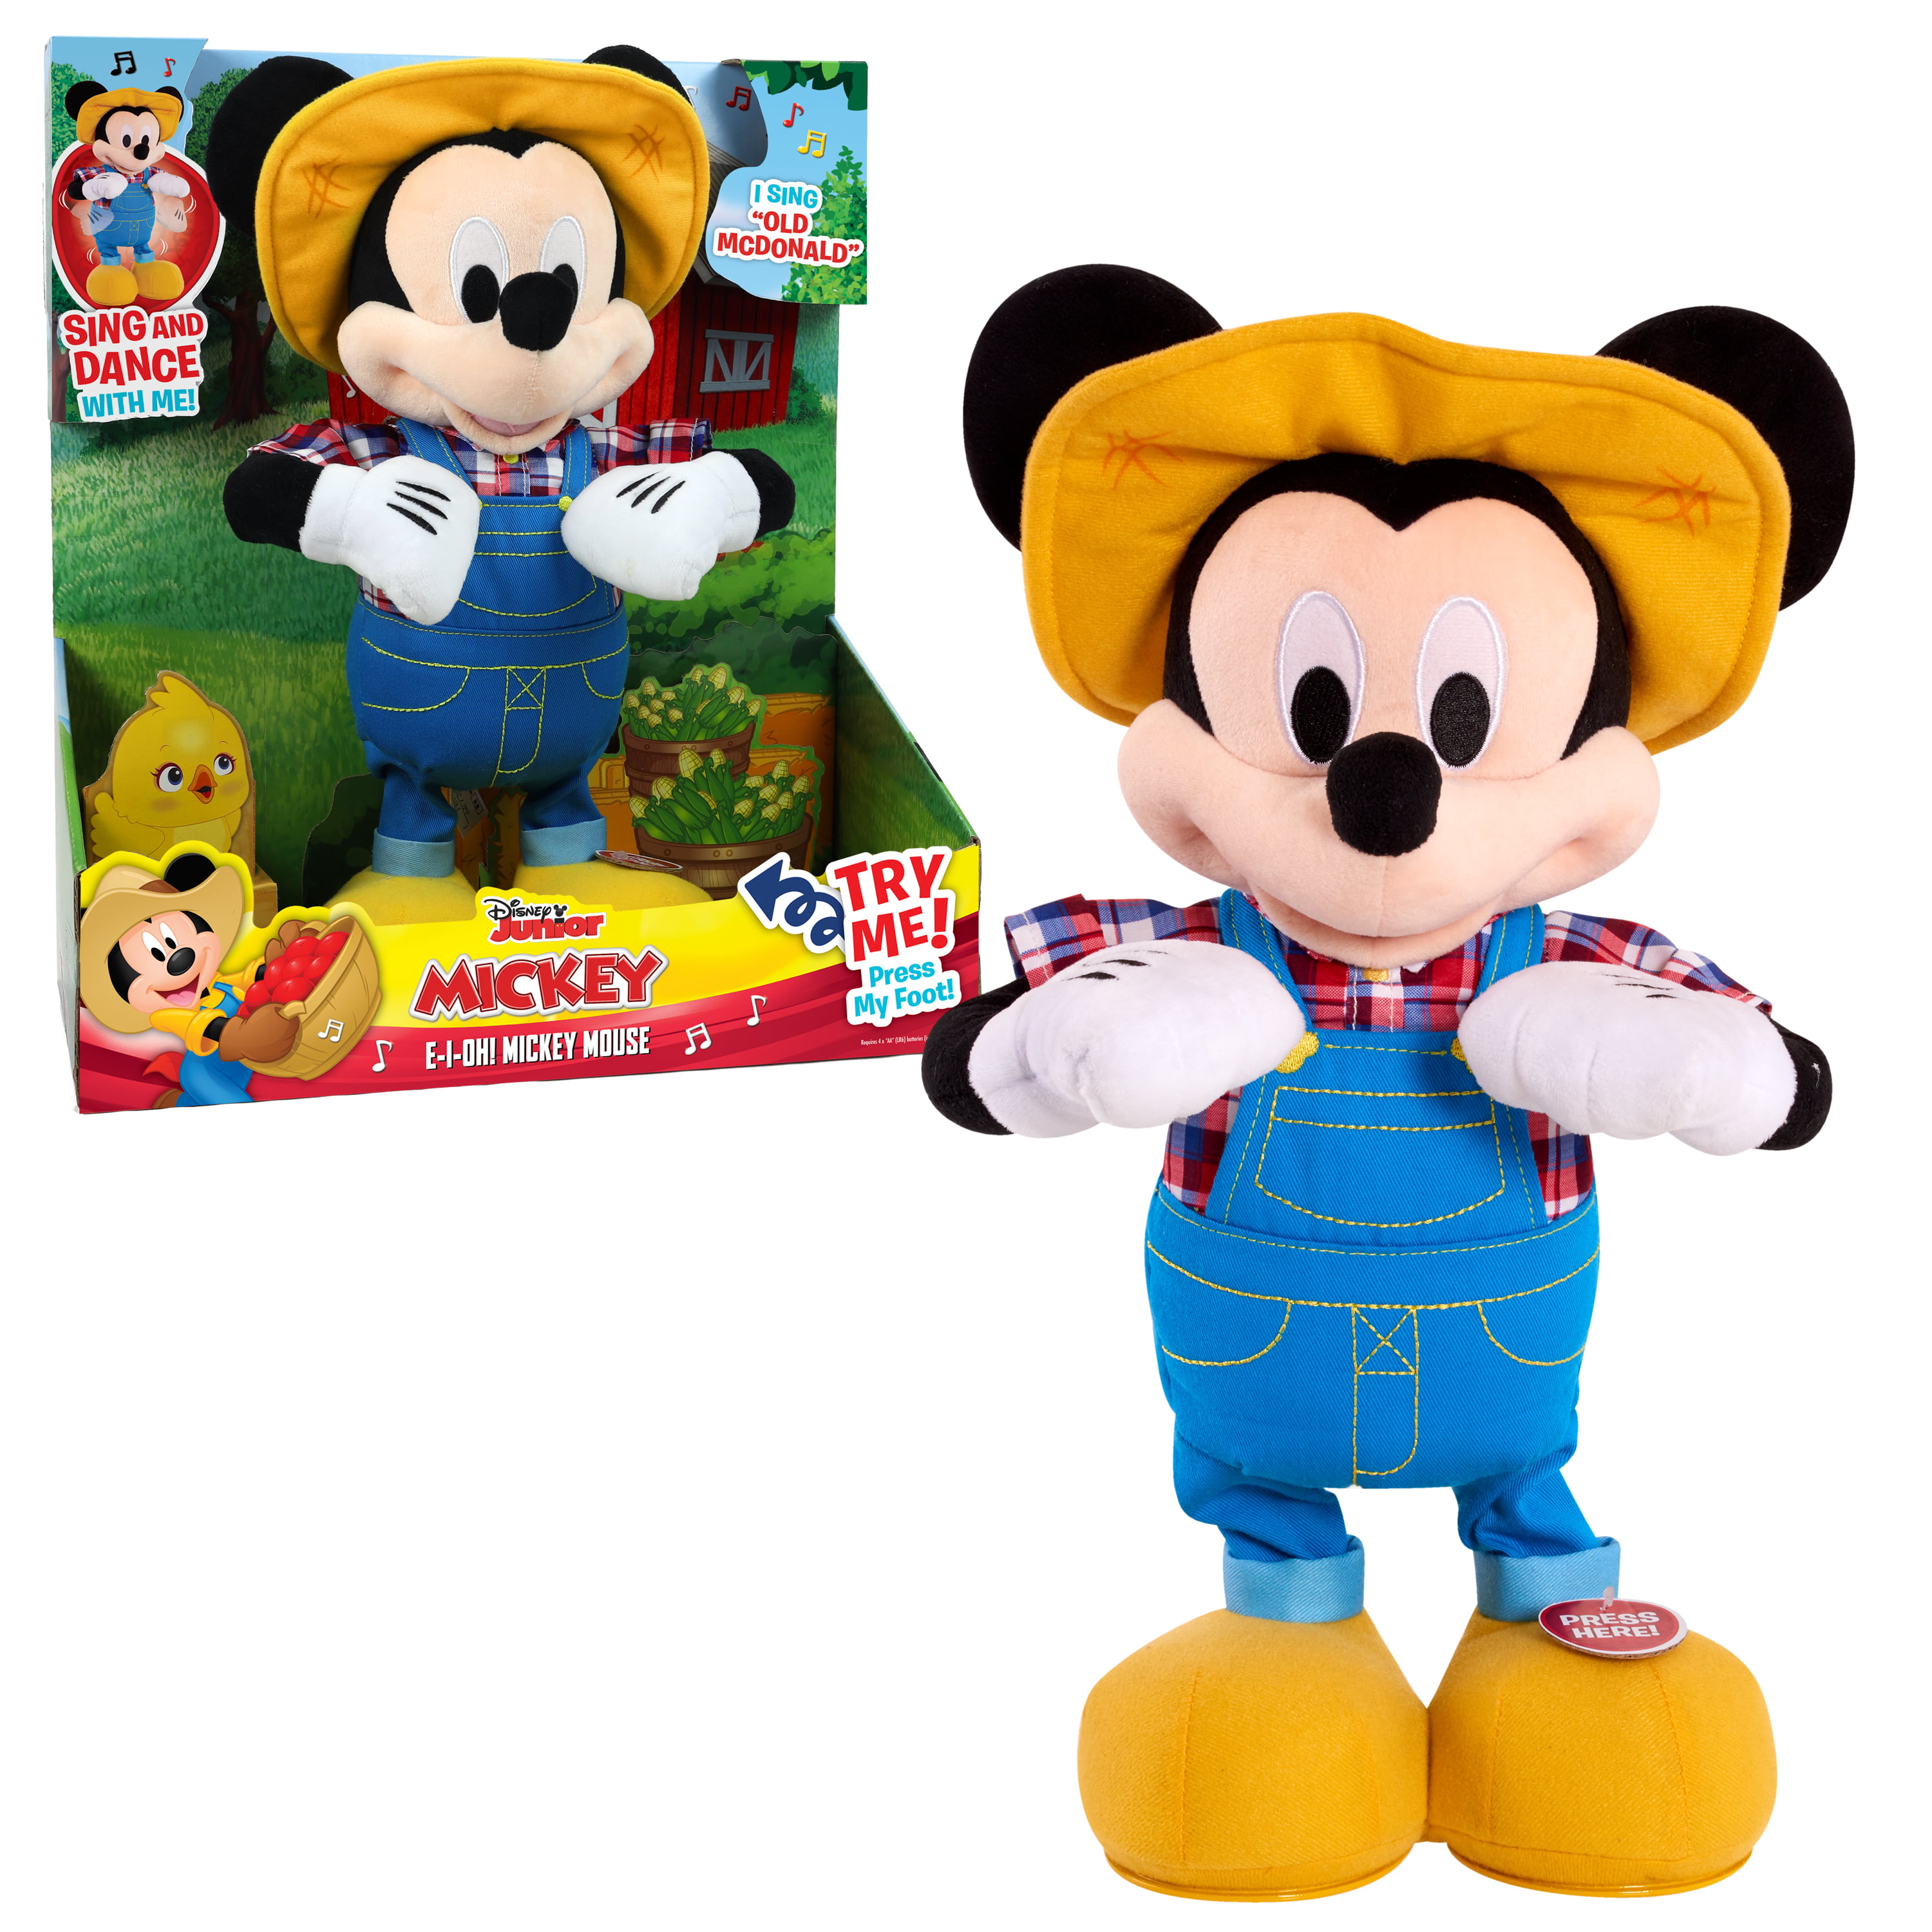 Disney Junior Mickey Mouse E-I-Oh! Mickey Mouse Feature Plush, Ages 3 +